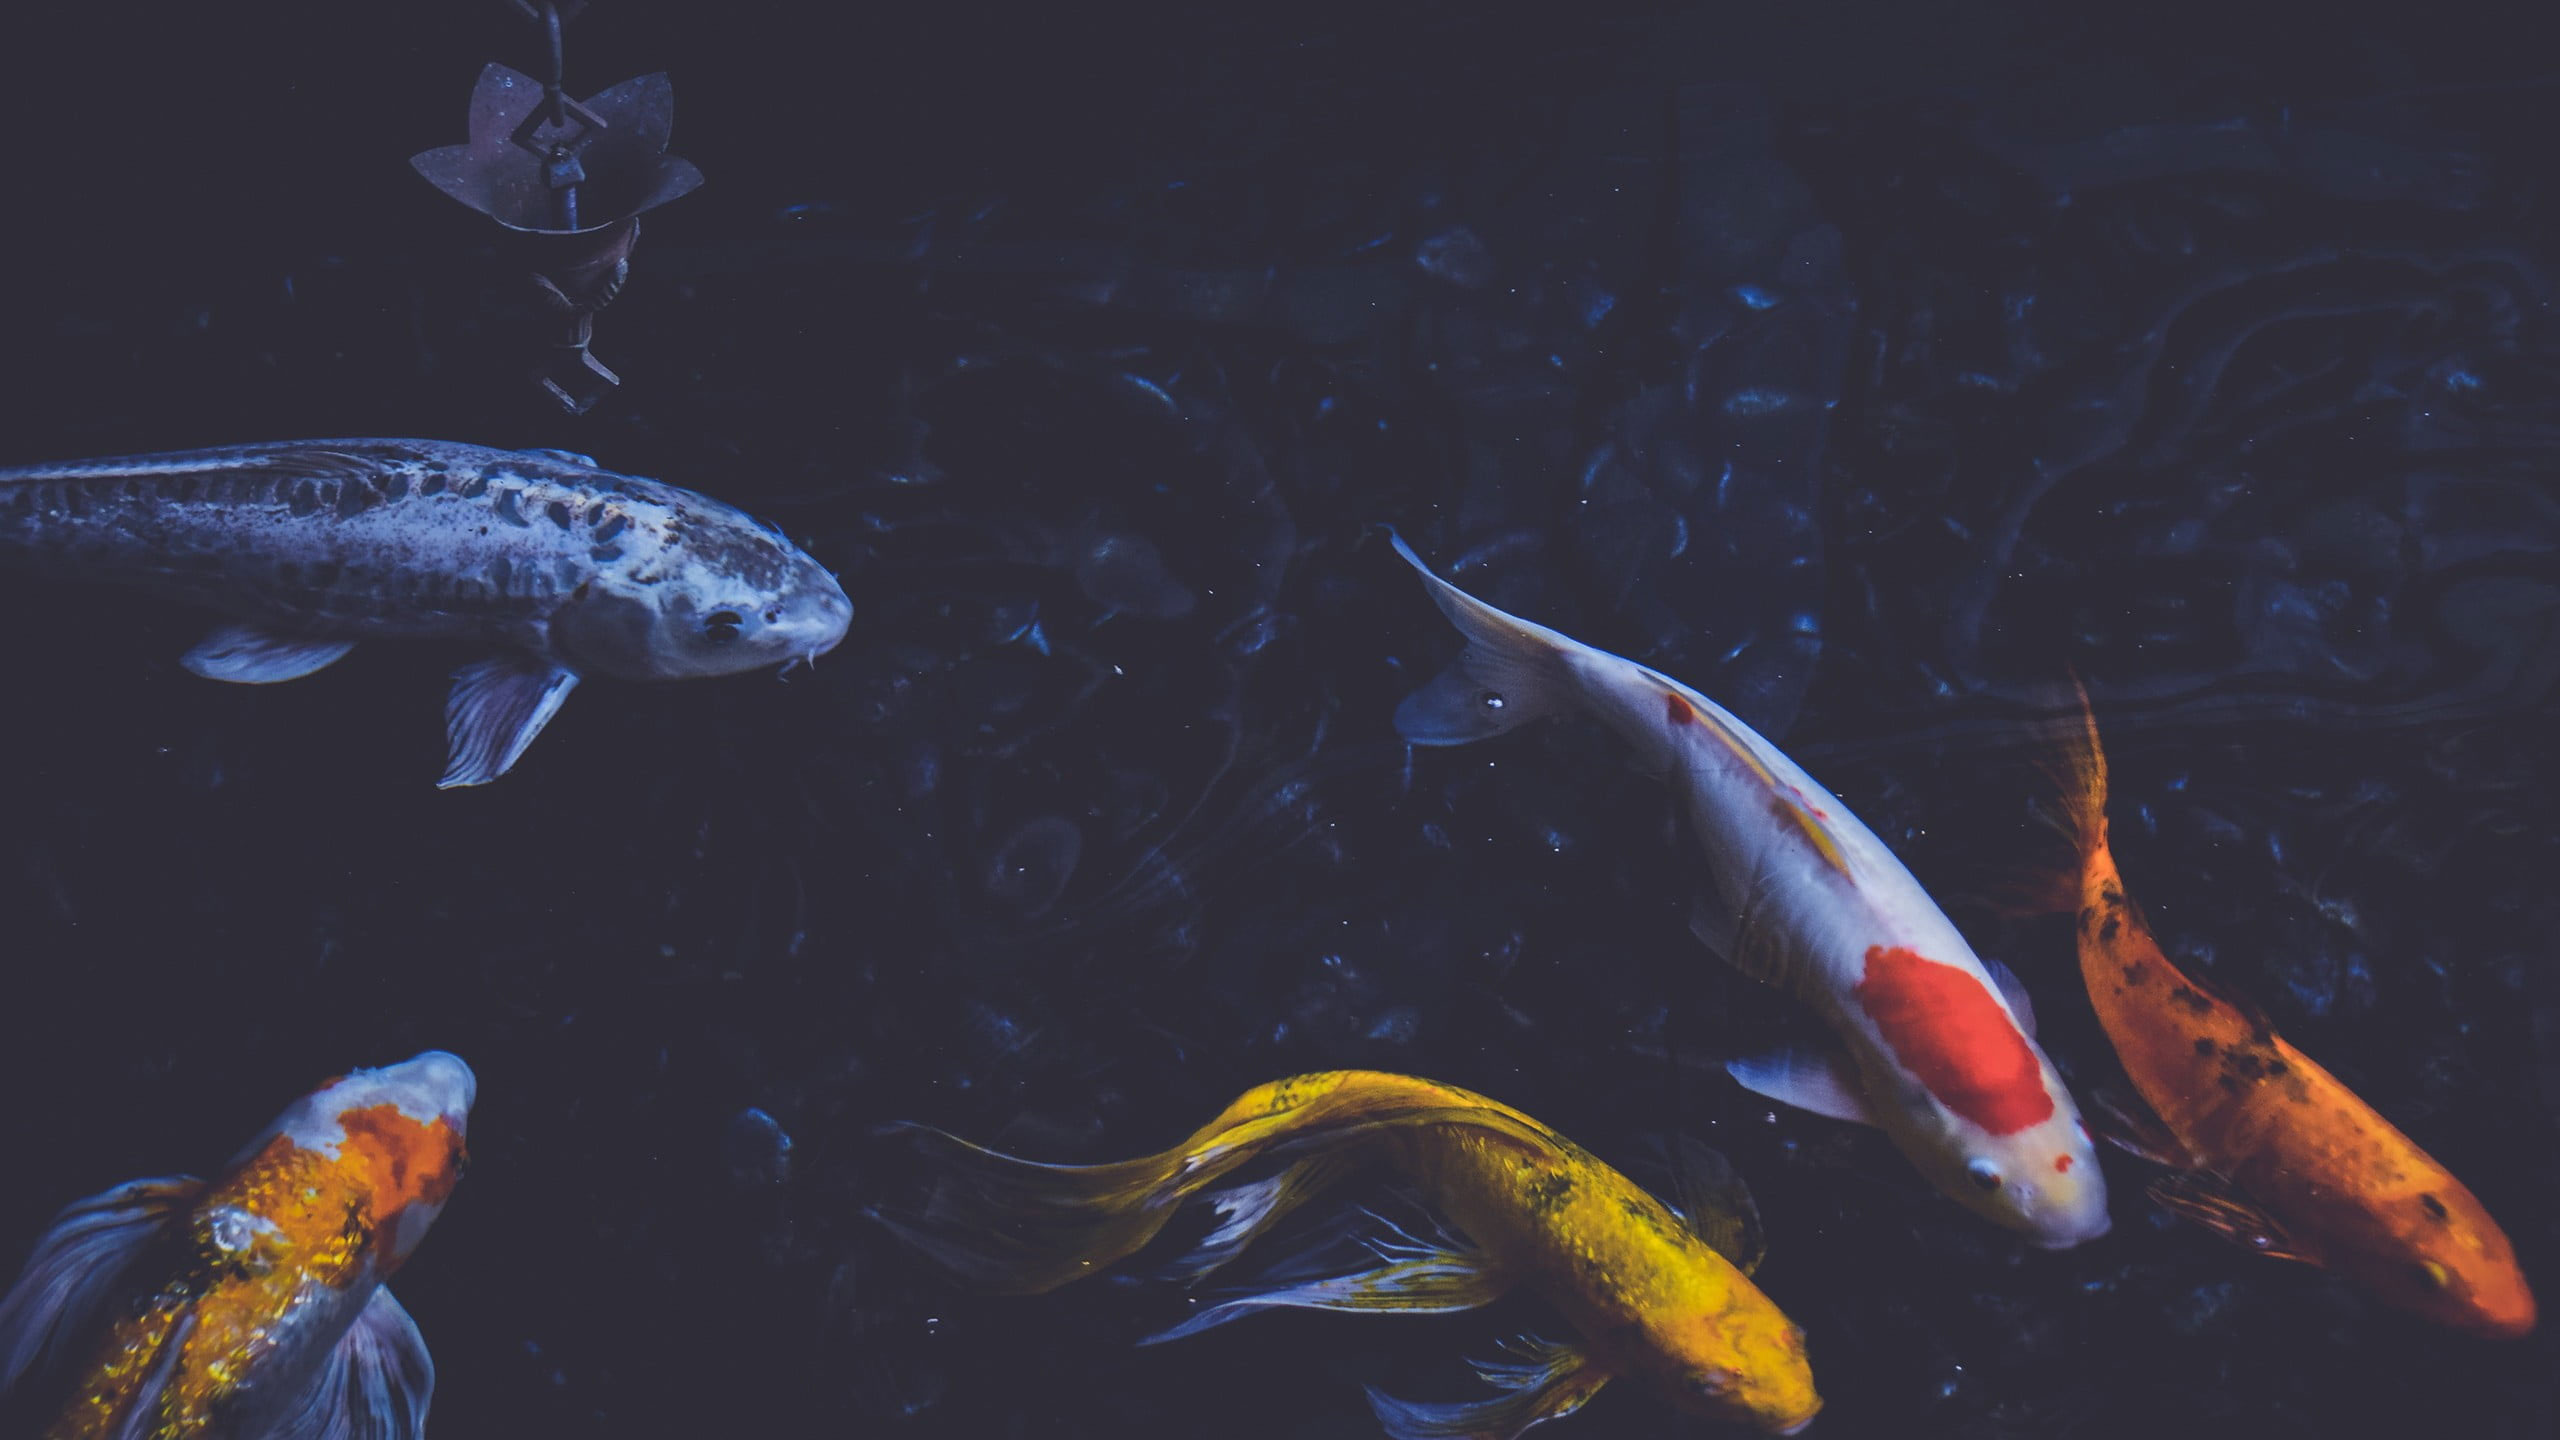 Wallpaper Flock Of Koi Fish, Photography, Pond, Water,